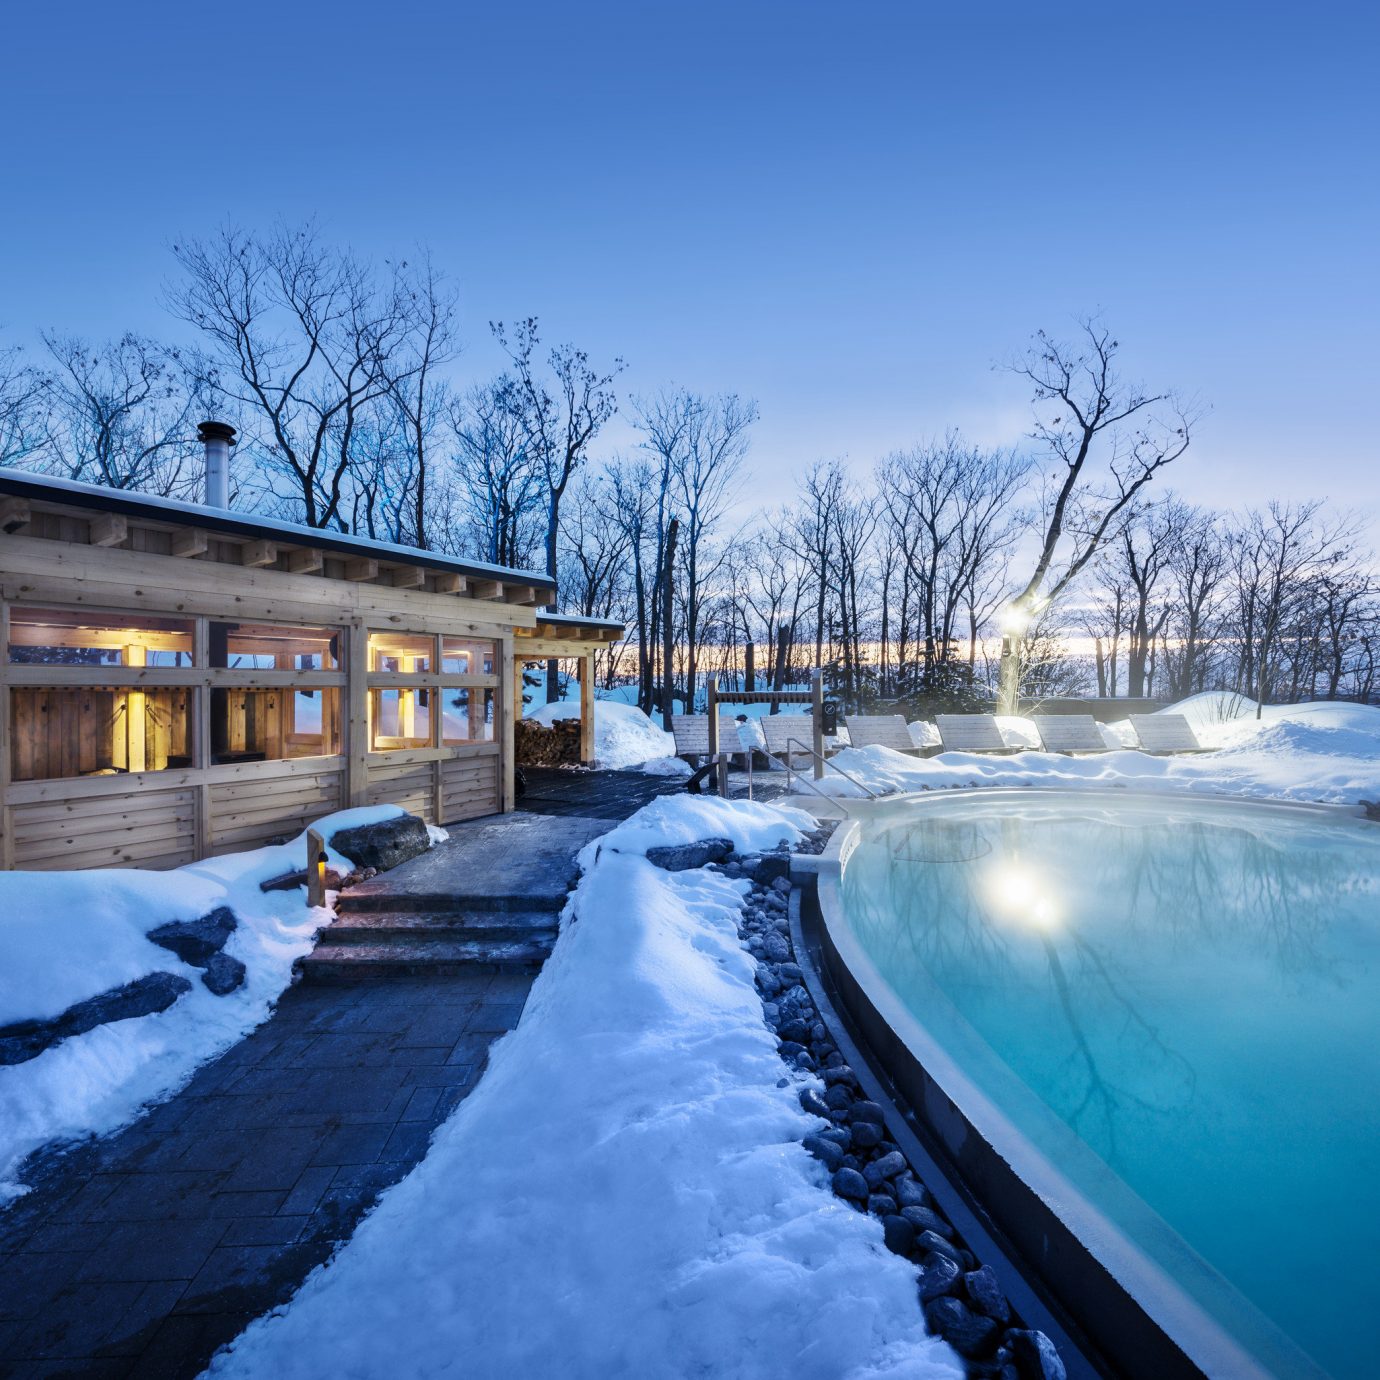 Health + Wellness Hotels Spa Retreats Trip Ideas snow outdoor sky tree Winter weather season covered freezing Nature morning landscape ice reflection